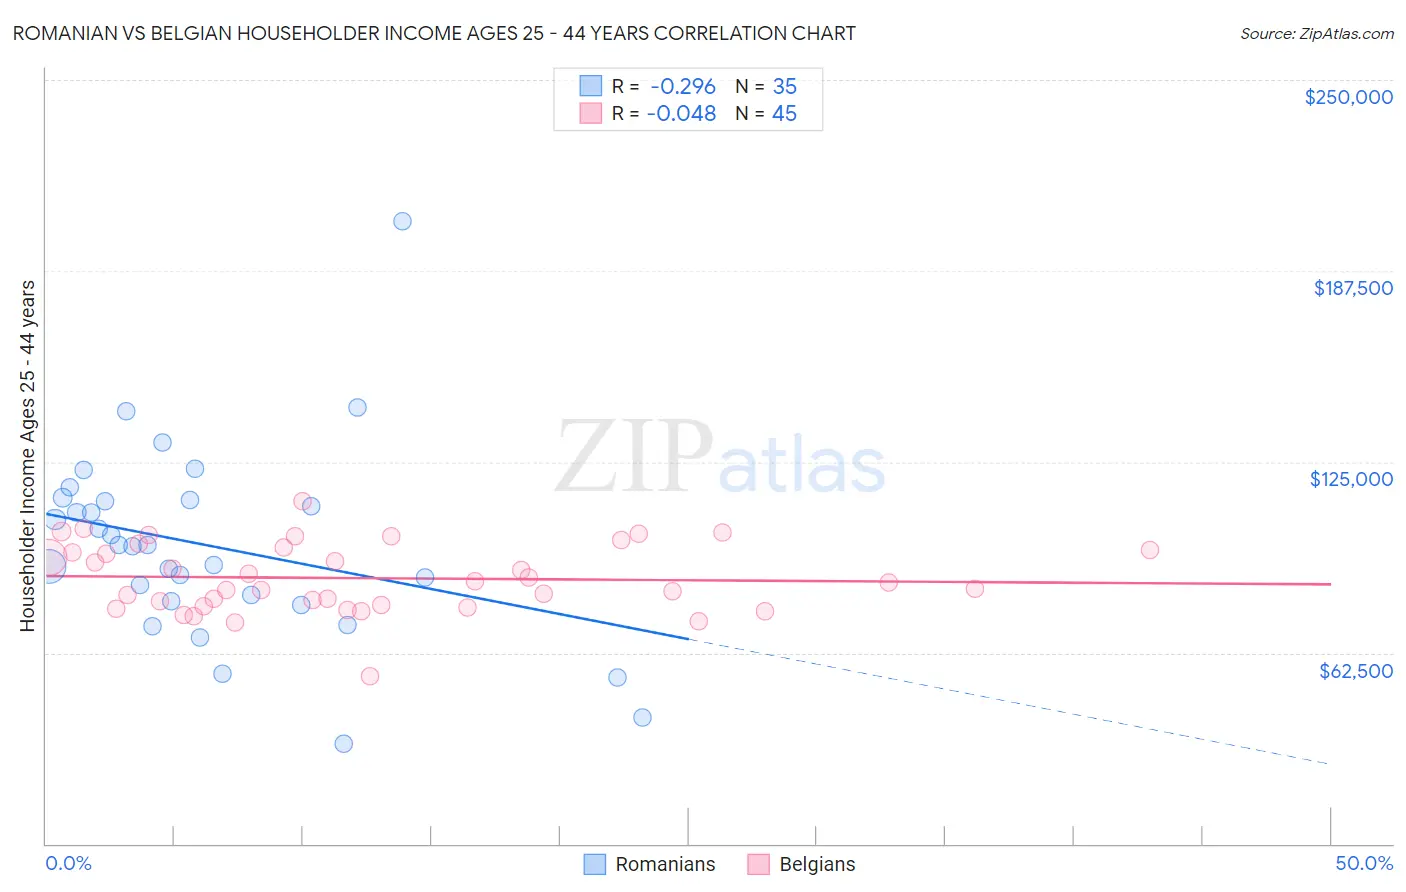 Romanian vs Belgian Householder Income Ages 25 - 44 years